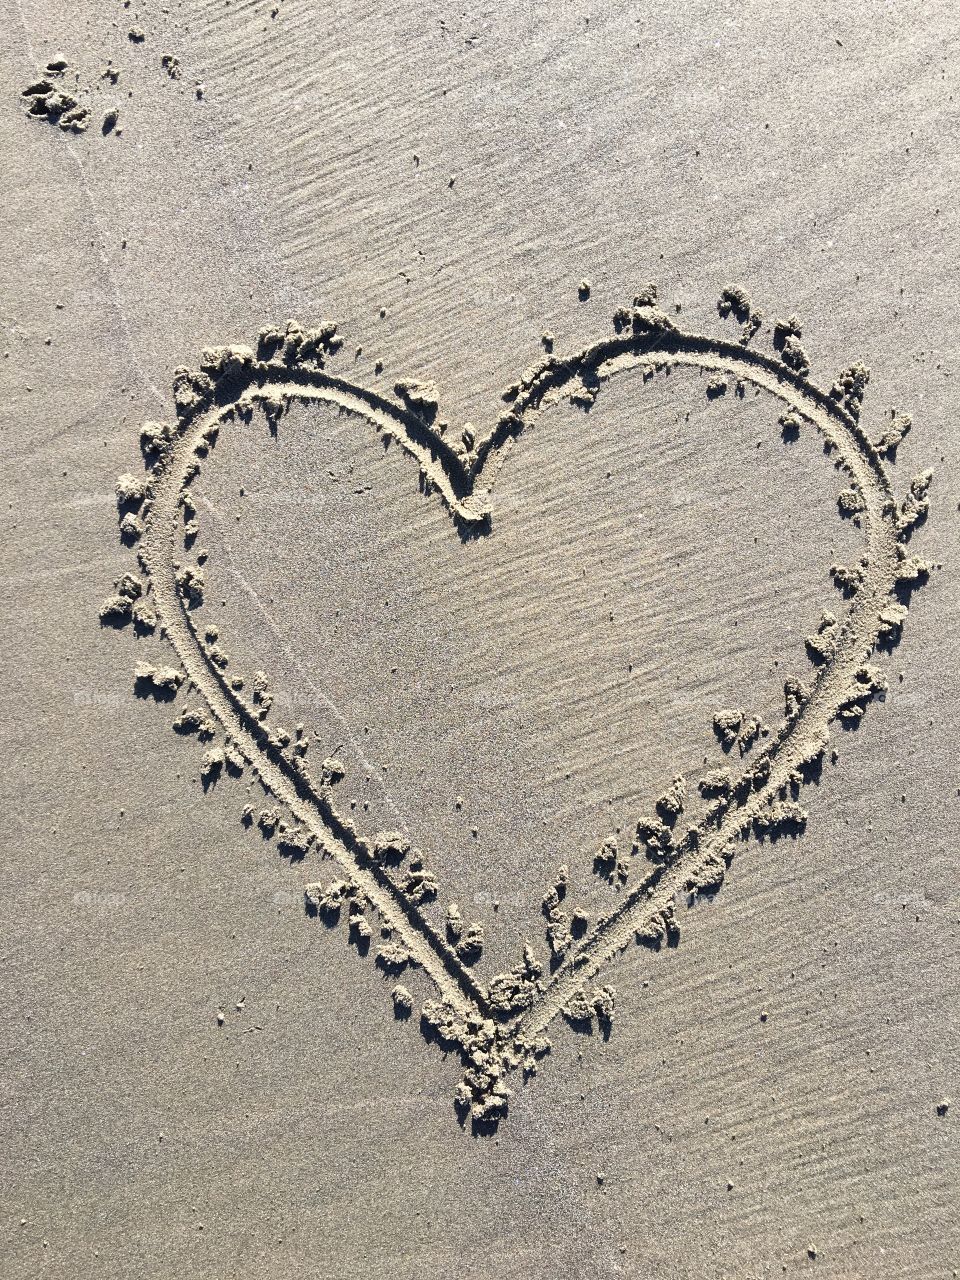 A bit of love carved into the sand, gone by the morning but captured forever by the lens.